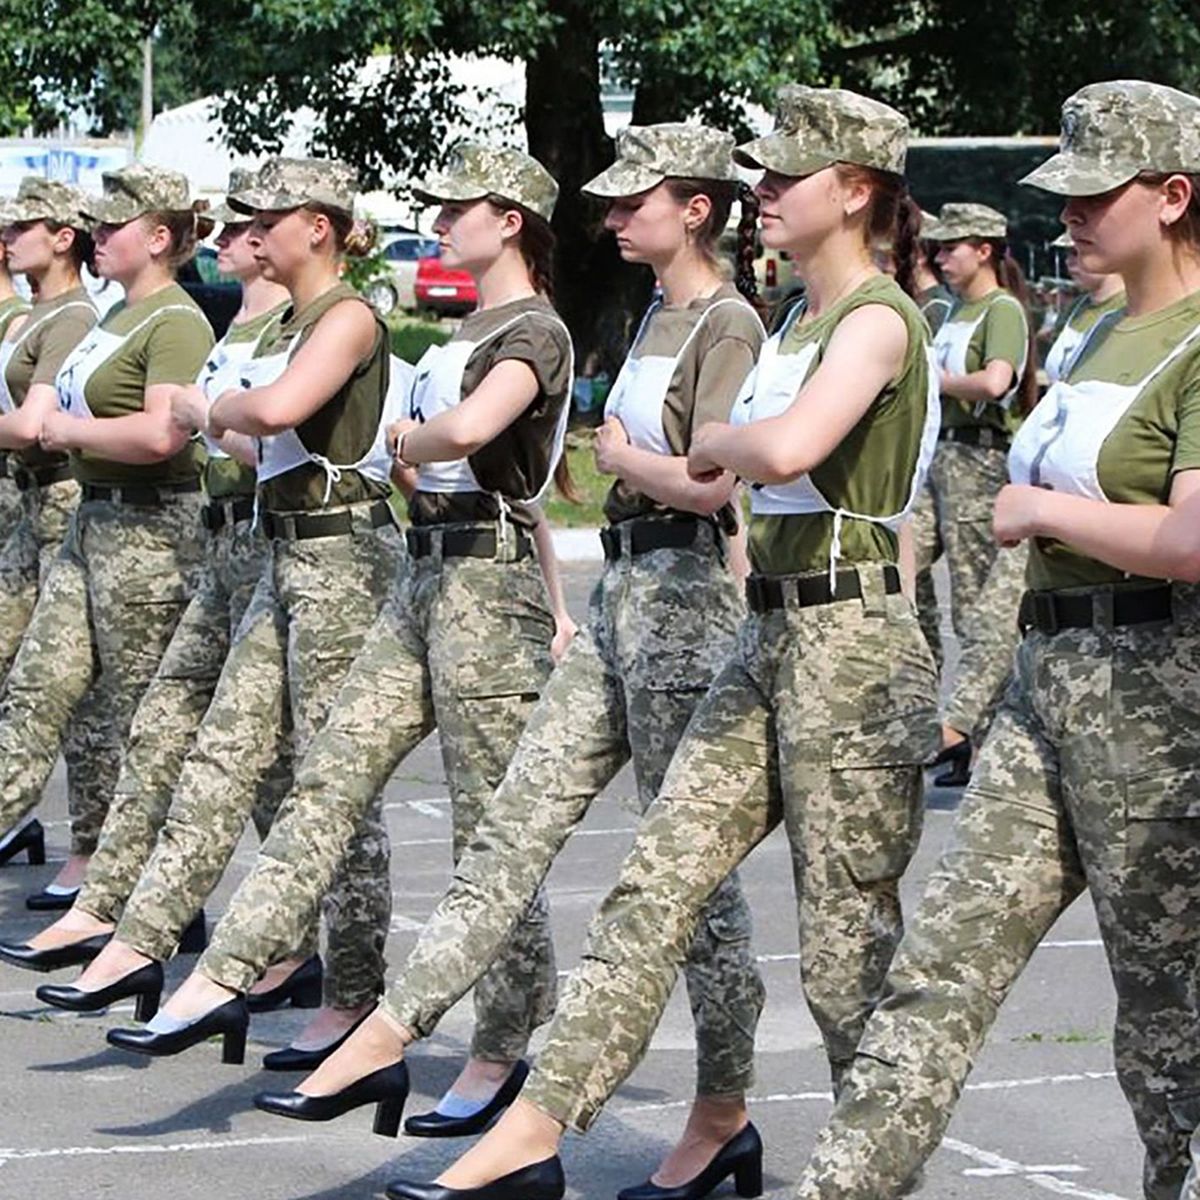 army's decision to female soldiers march in high heels sparks backlash